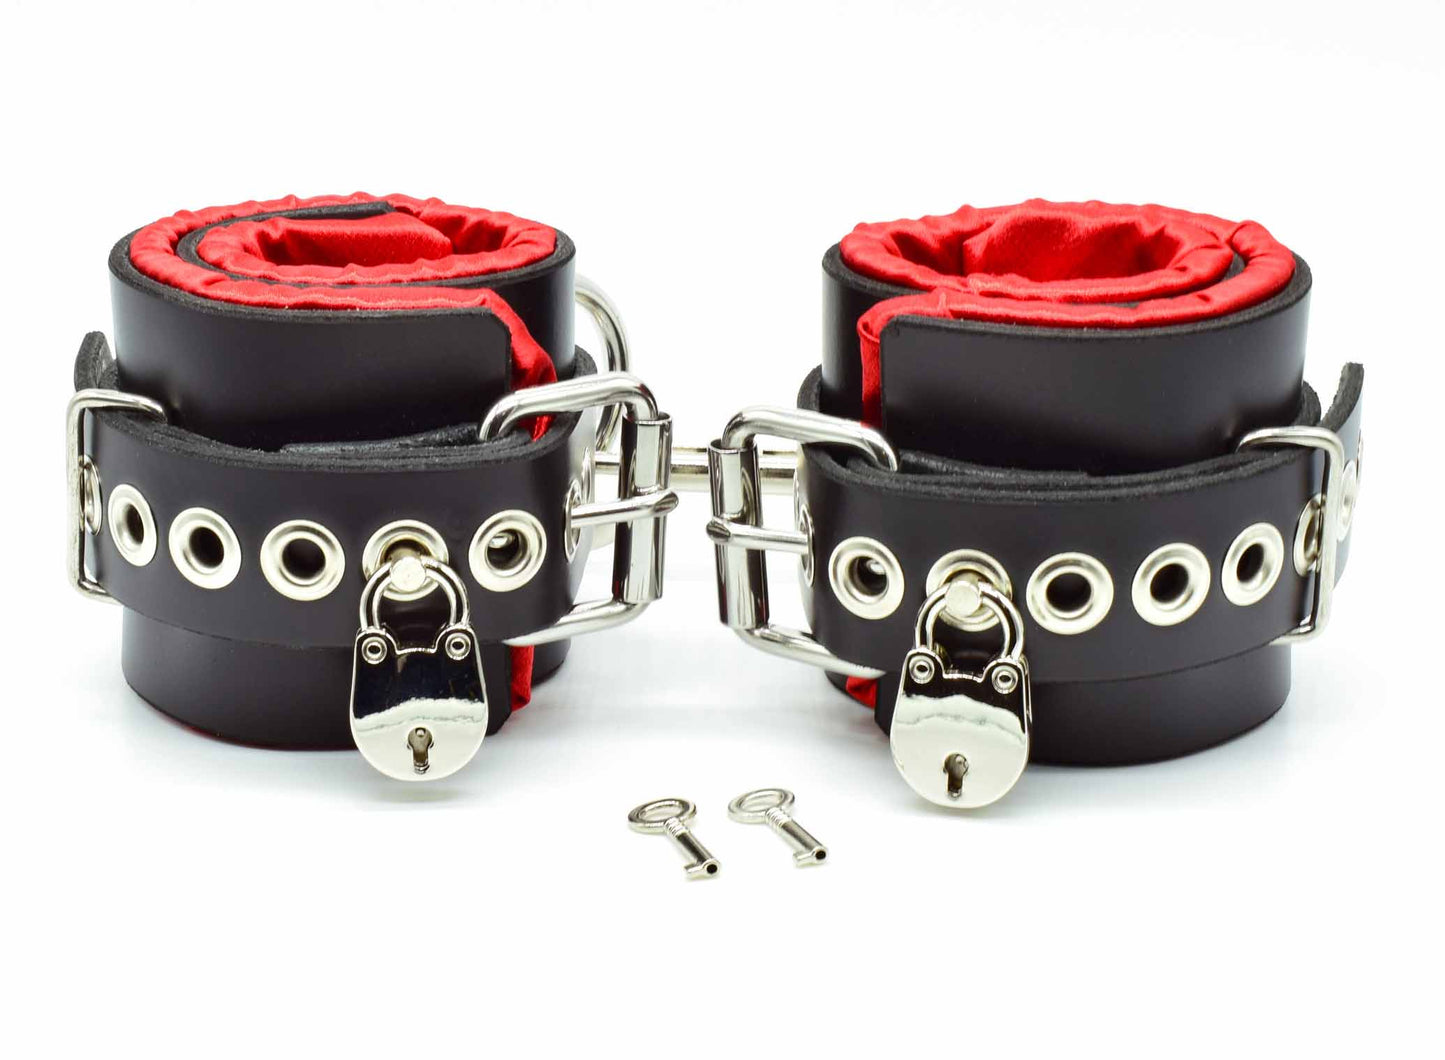 Black with Red satin lined bondage cuffs with tentacle eyelets, locks on each cuff and keys.